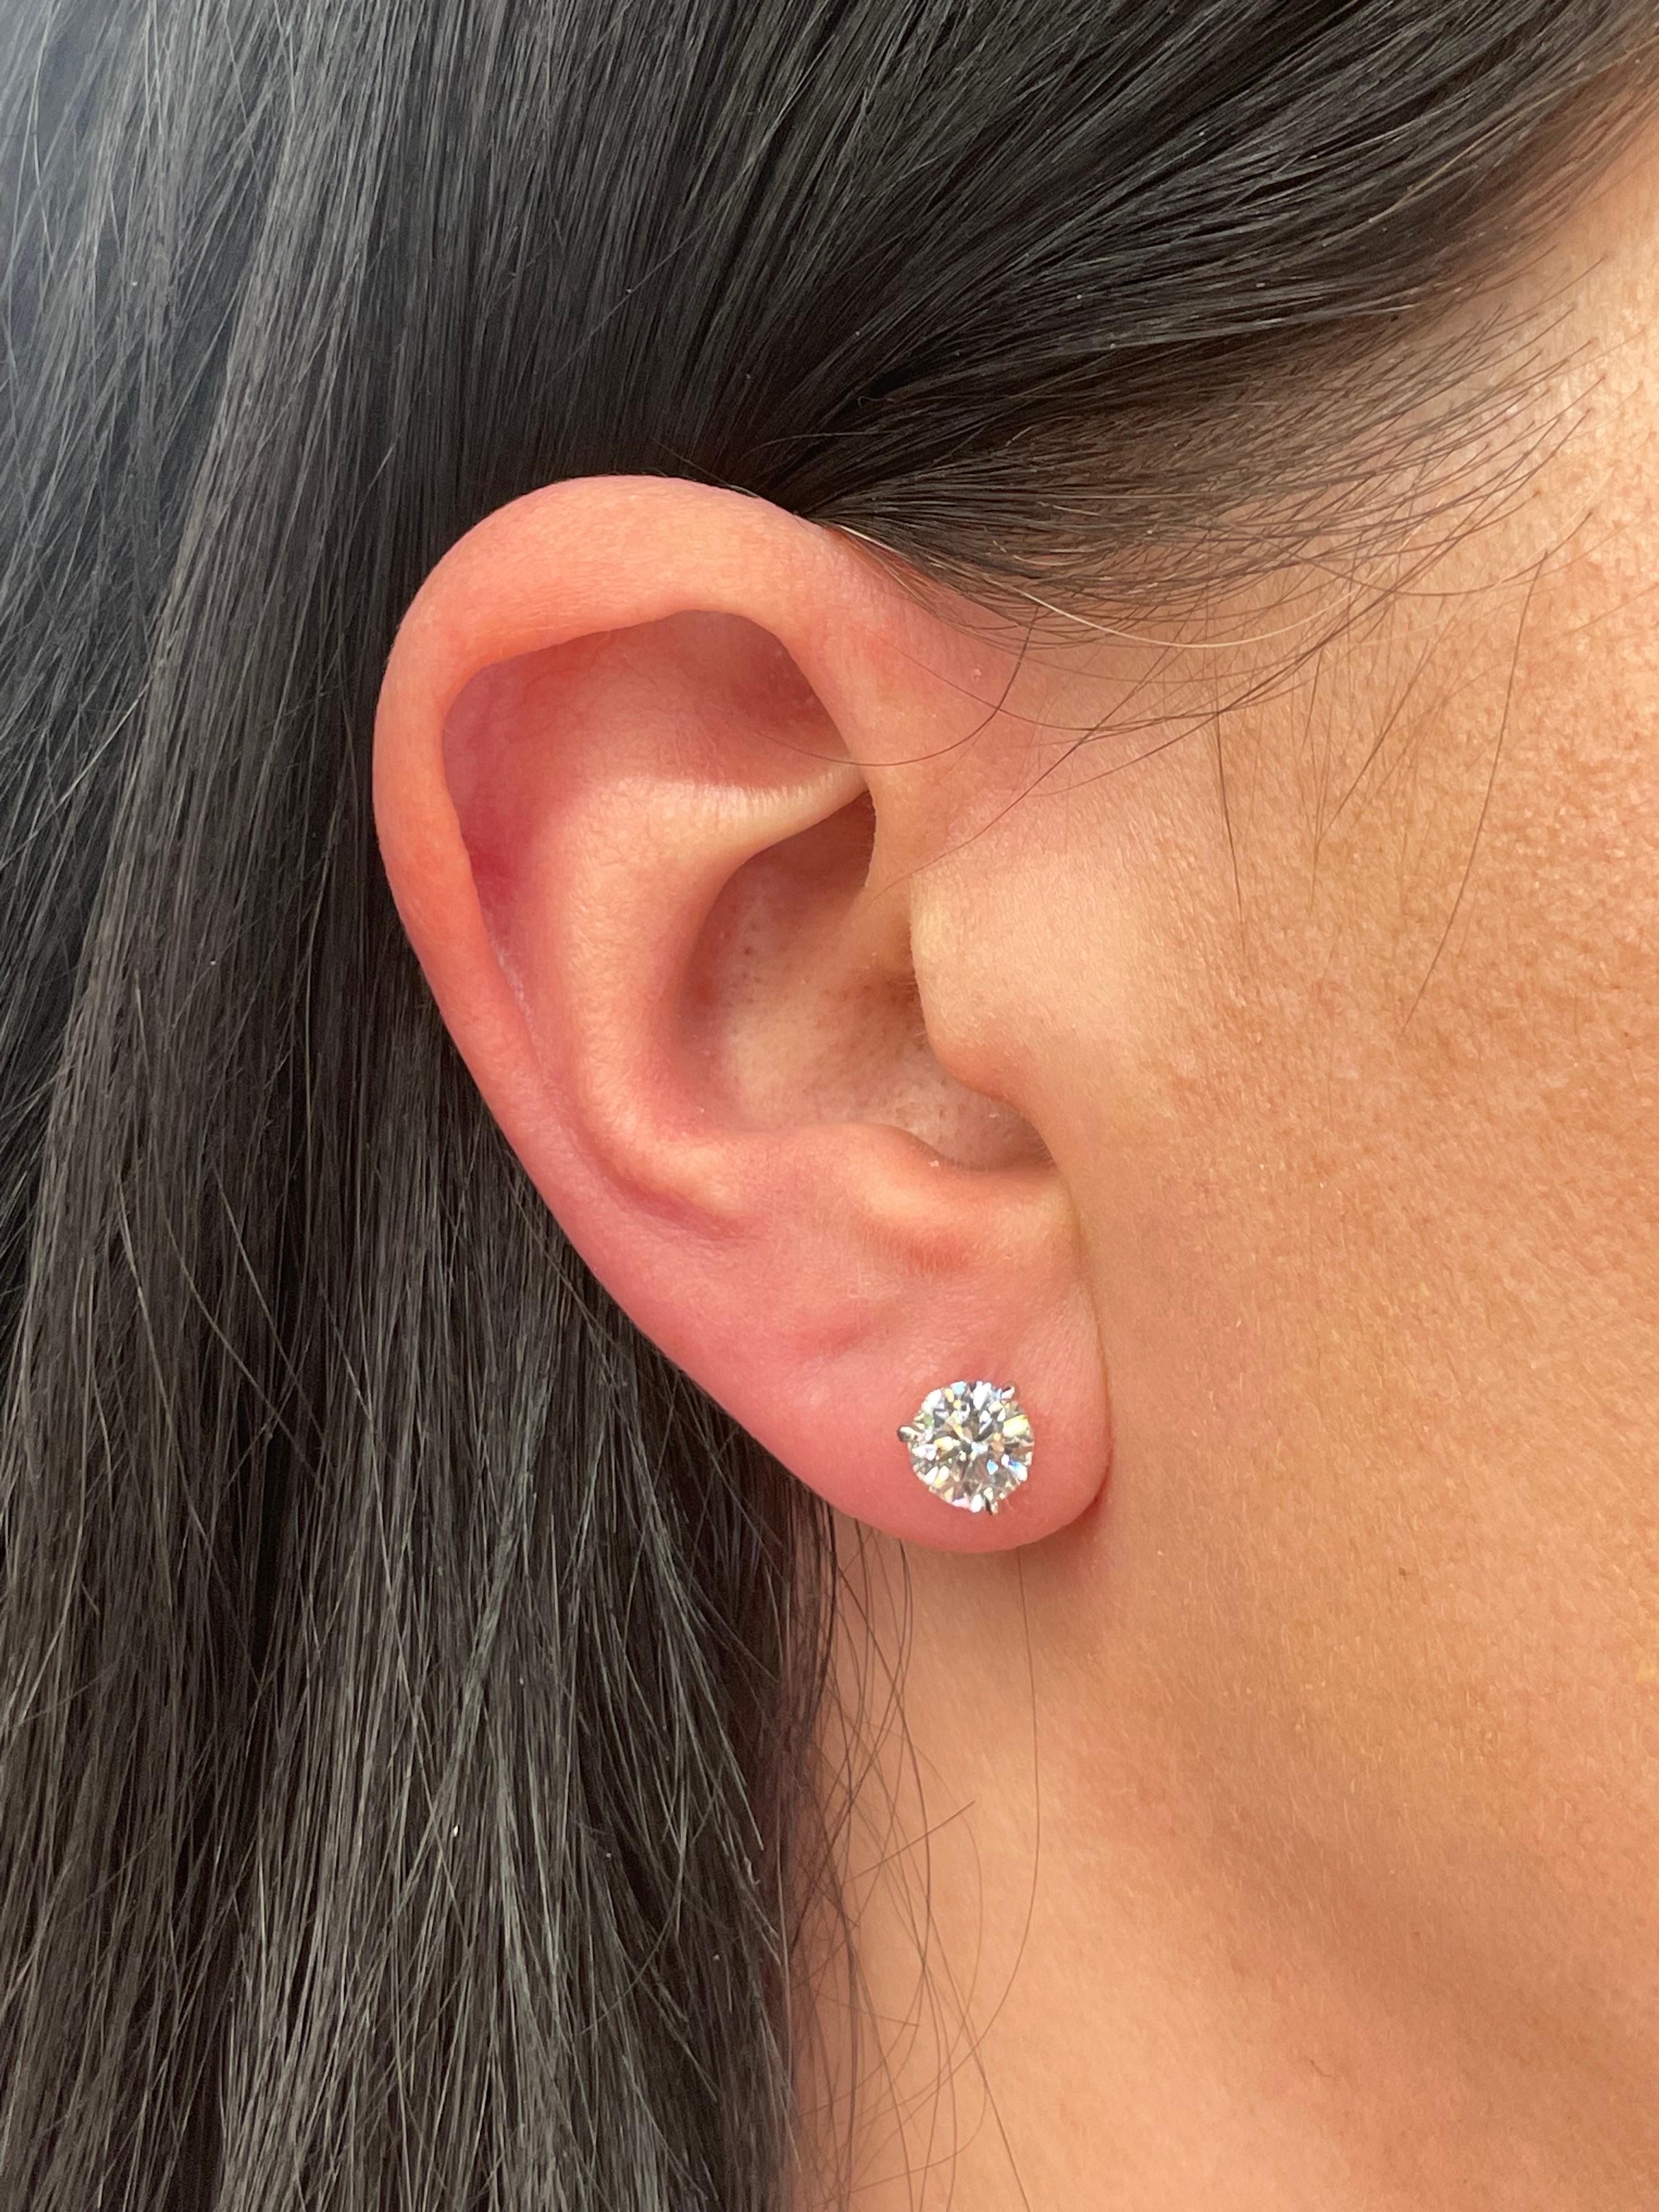 GIA Certified Diamond Stud earrings weighing 2.02 Carats, Color G-H, Clarity SI2, in a 18 Karat White Gold Champagne Setting.
Full of Life, Beautiful Pair!

Setting can be changed to a Basket, Martini or Champagne/ 3 or 4 Prong/ 14 or 18 Karat.

DM